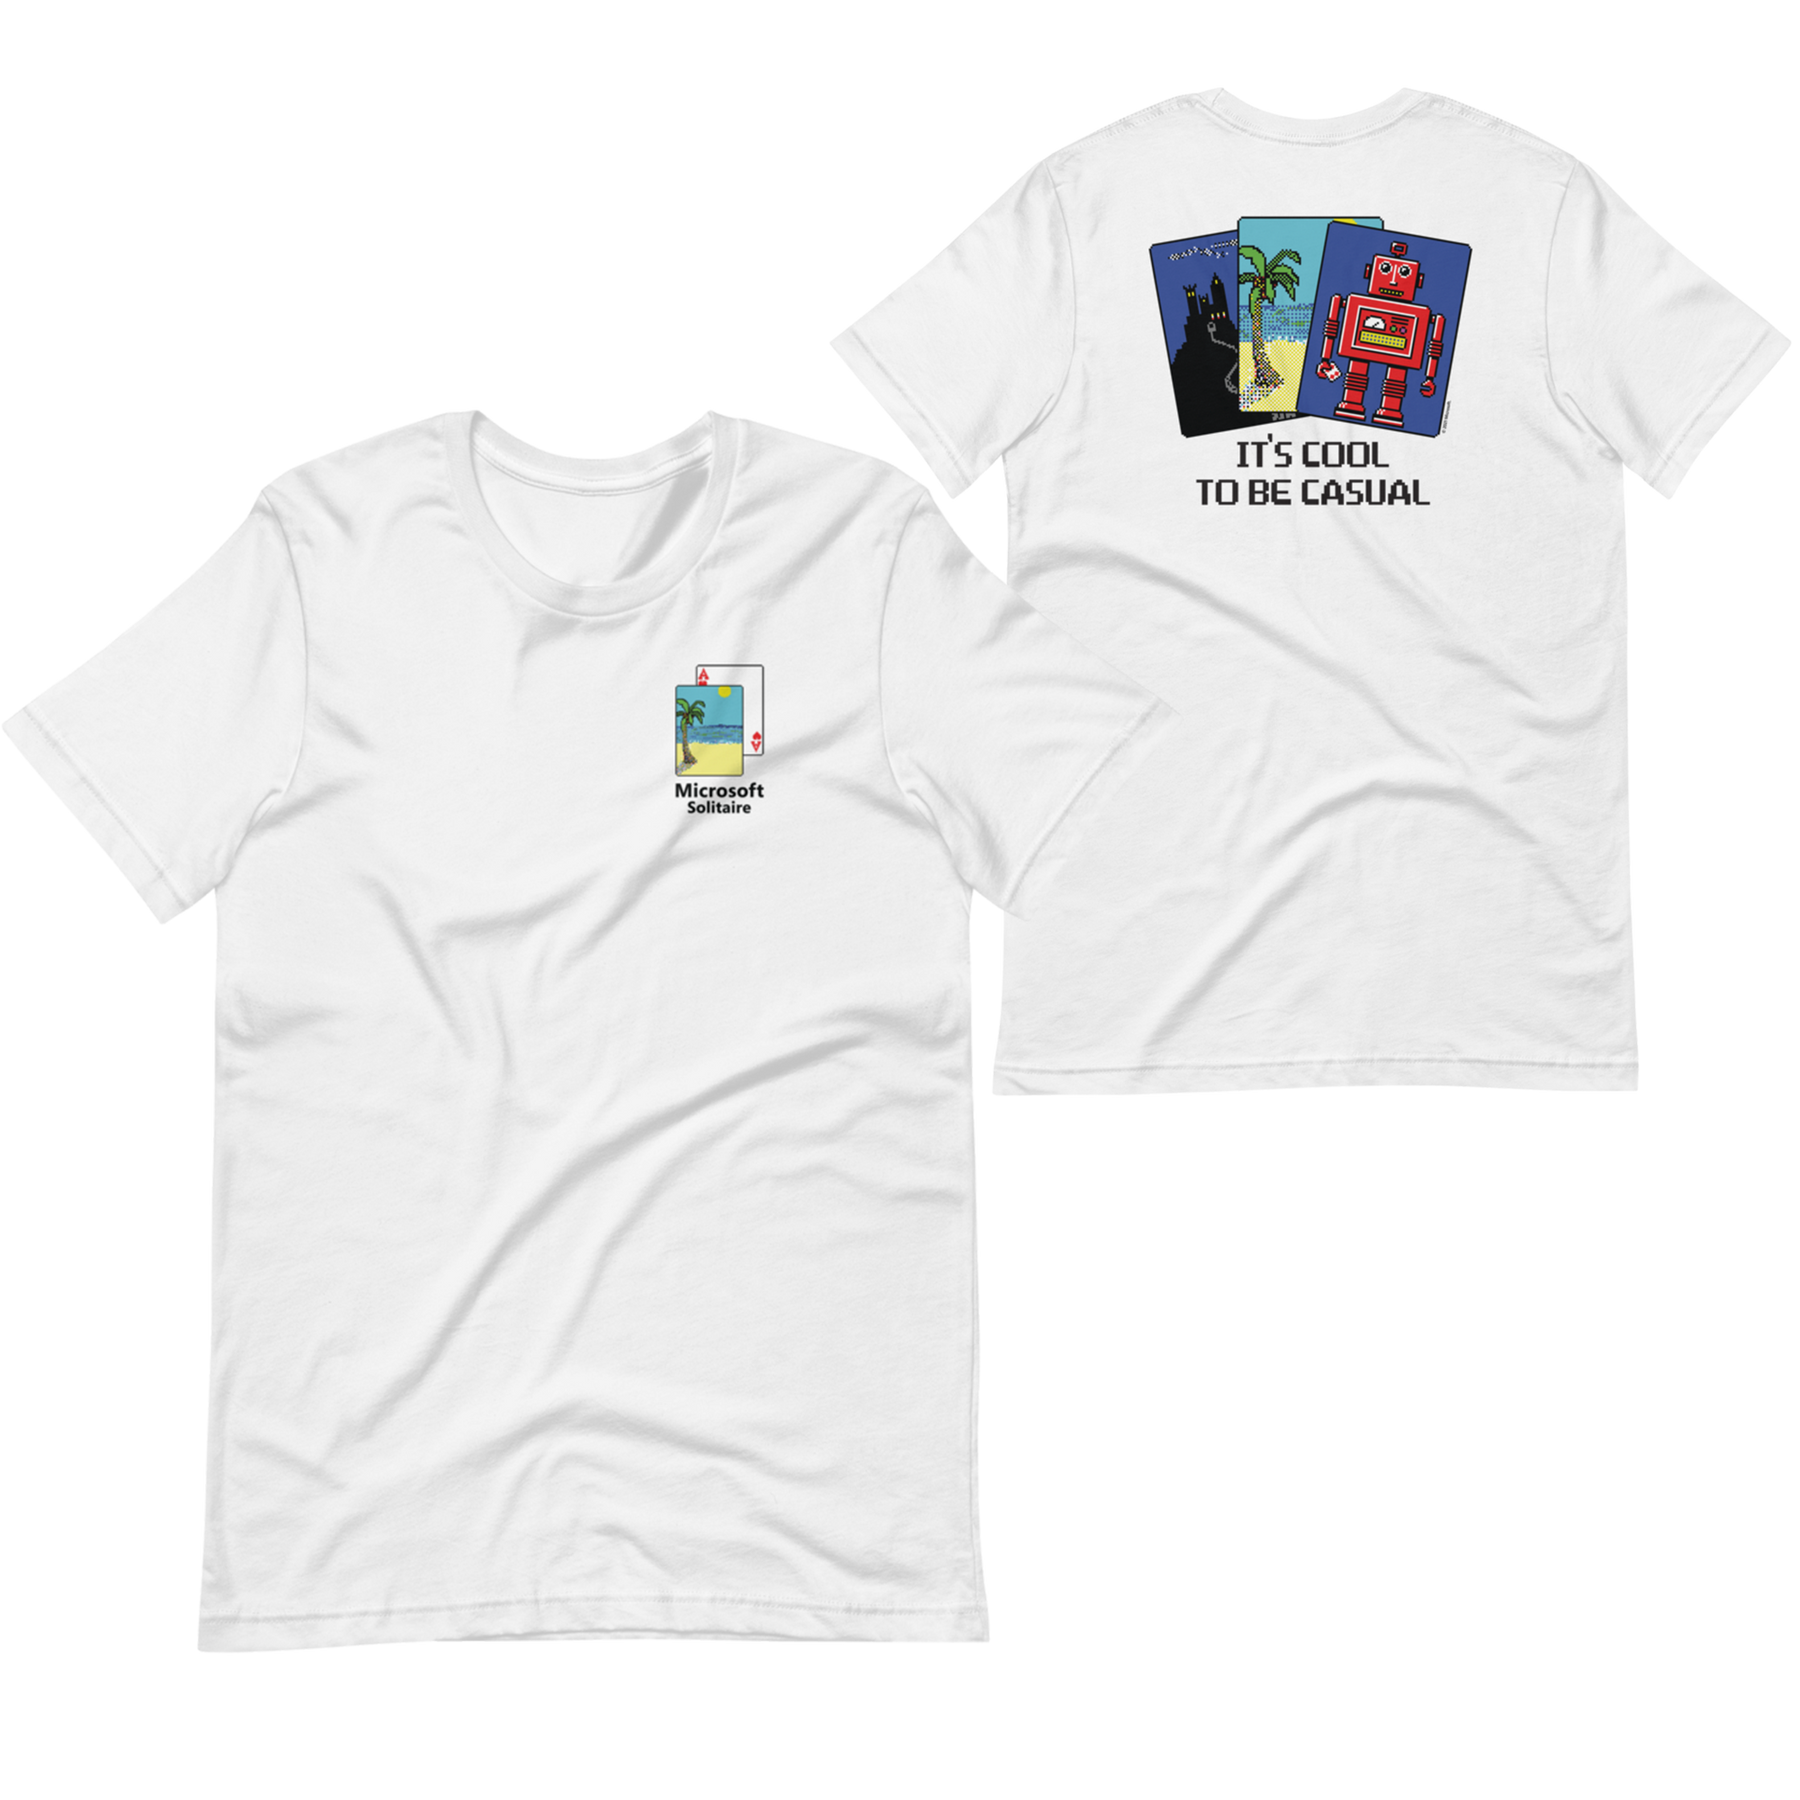 Microsoft Solitaire Collection - **This Sweepstakes Has Ended** T-shirts,  hoodies, and mugs, OH MY! NEW casual wear for Solitaire and Minesweeper  fans is NOW available in the Microsoft Casual Games Collection online! (